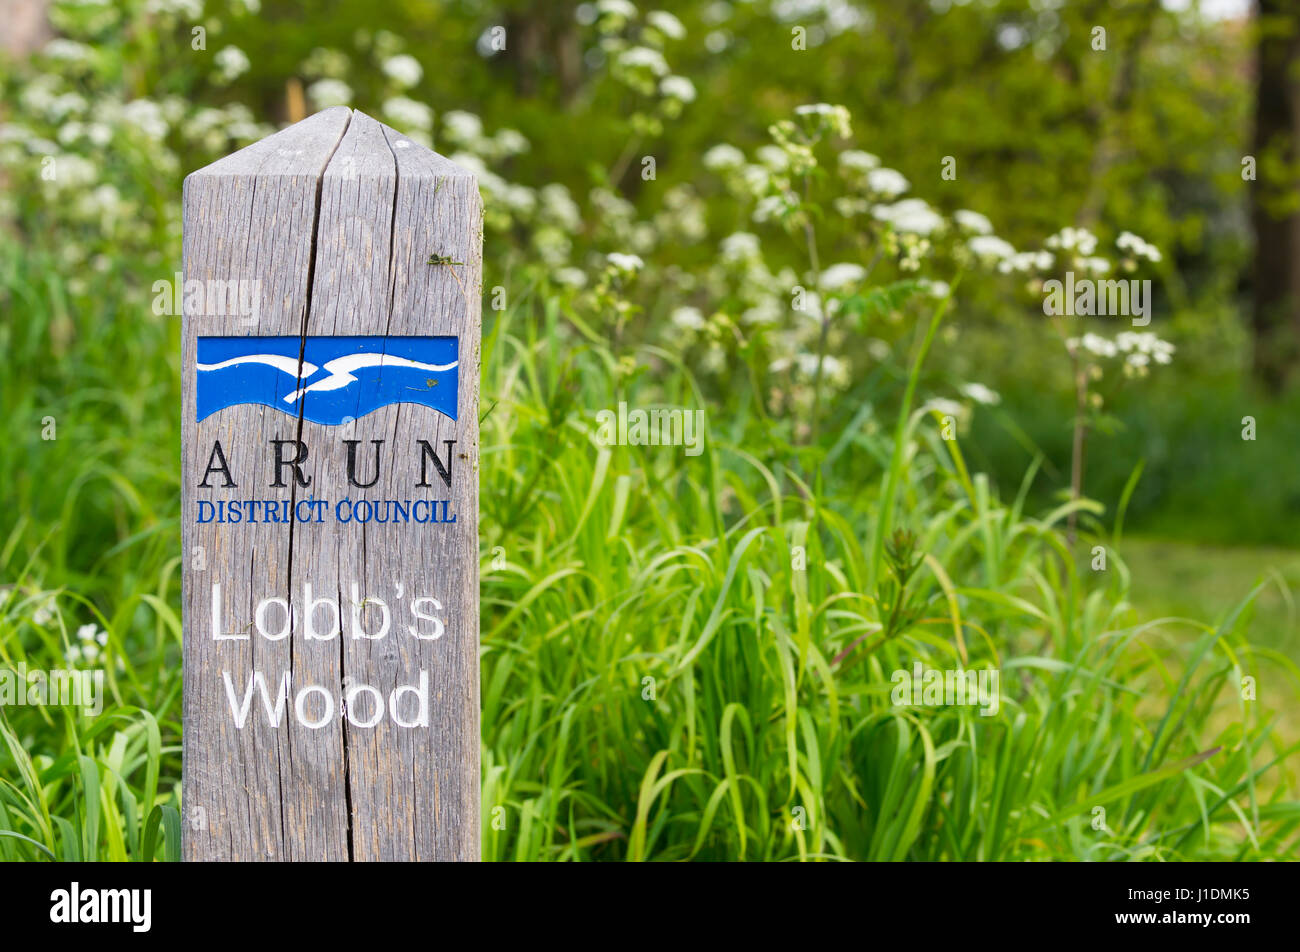 Lobb's Wood entrance showing a wooden sign in Littlehampton, West Sussex, England, UK. Stock Photo